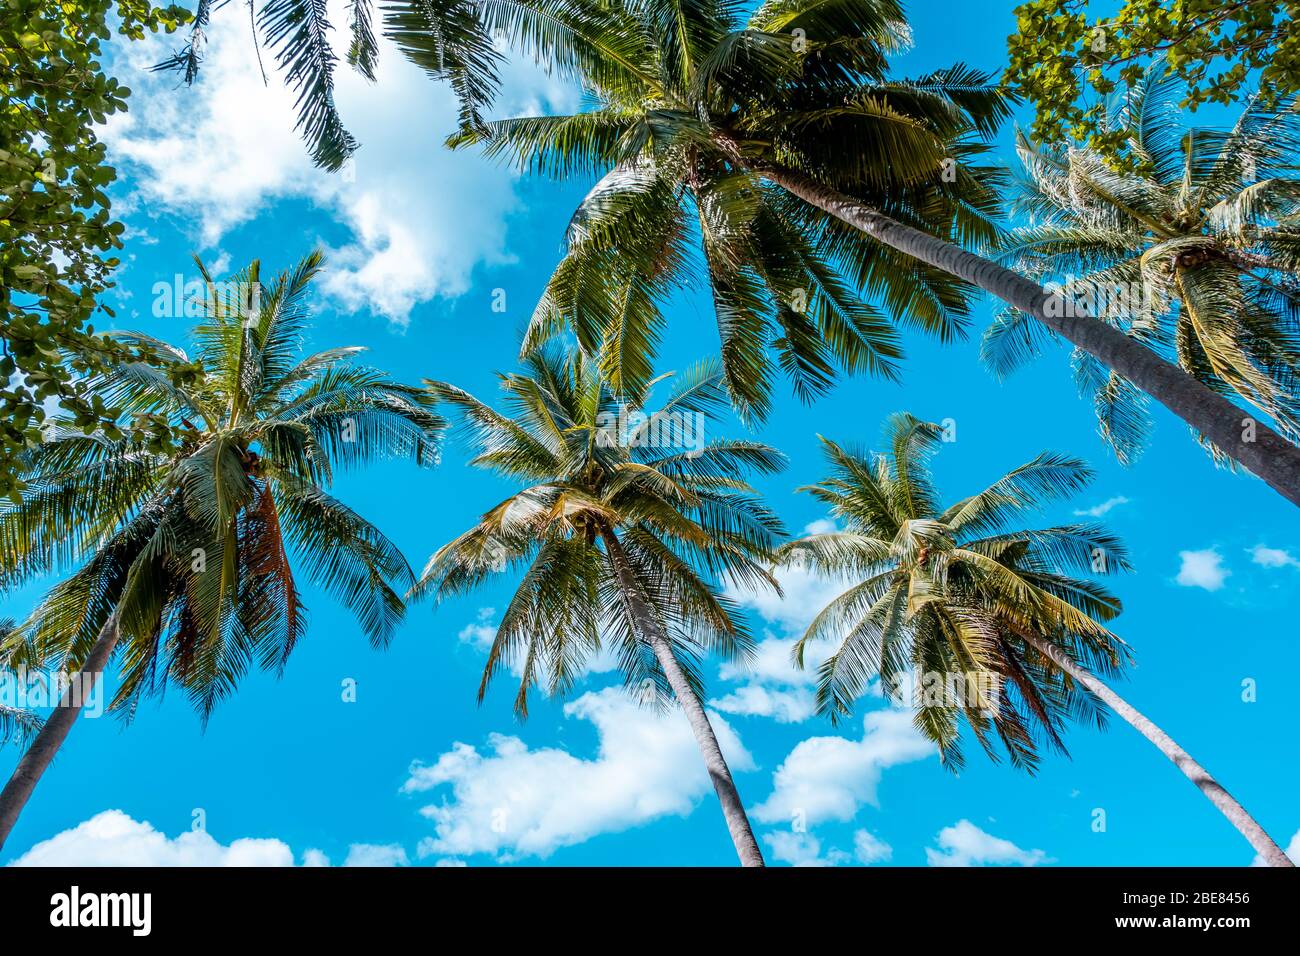 Branches Of Coconut Palm Trees Bottom To Above Blue Sky And Many